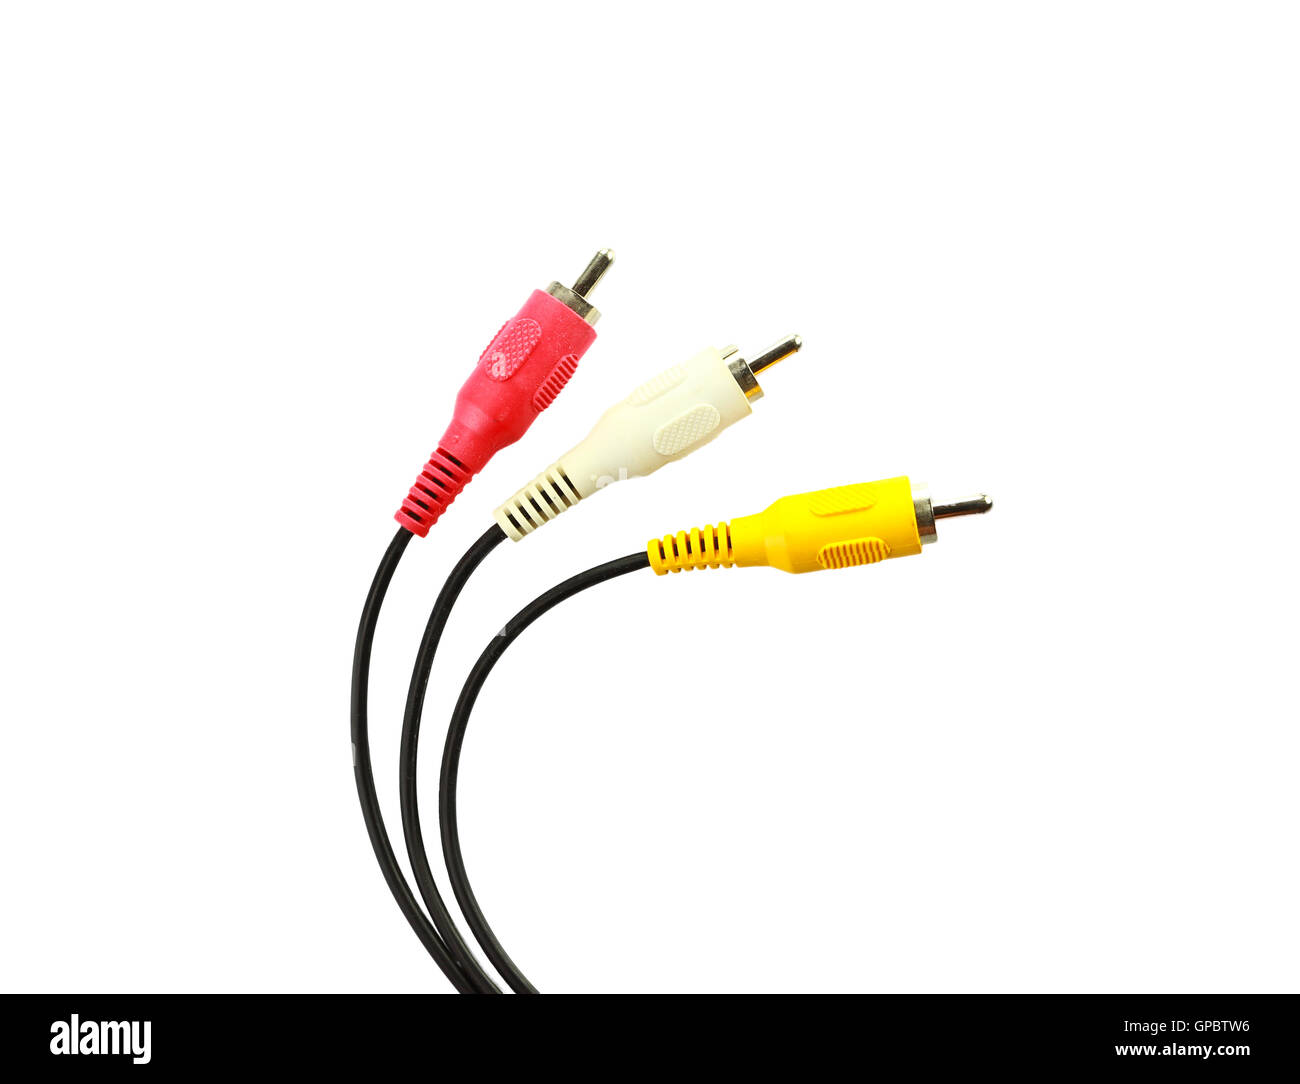 Audio Visual Cables For TV Video Isolated on White Stock Photo - Alamy, cable  tv